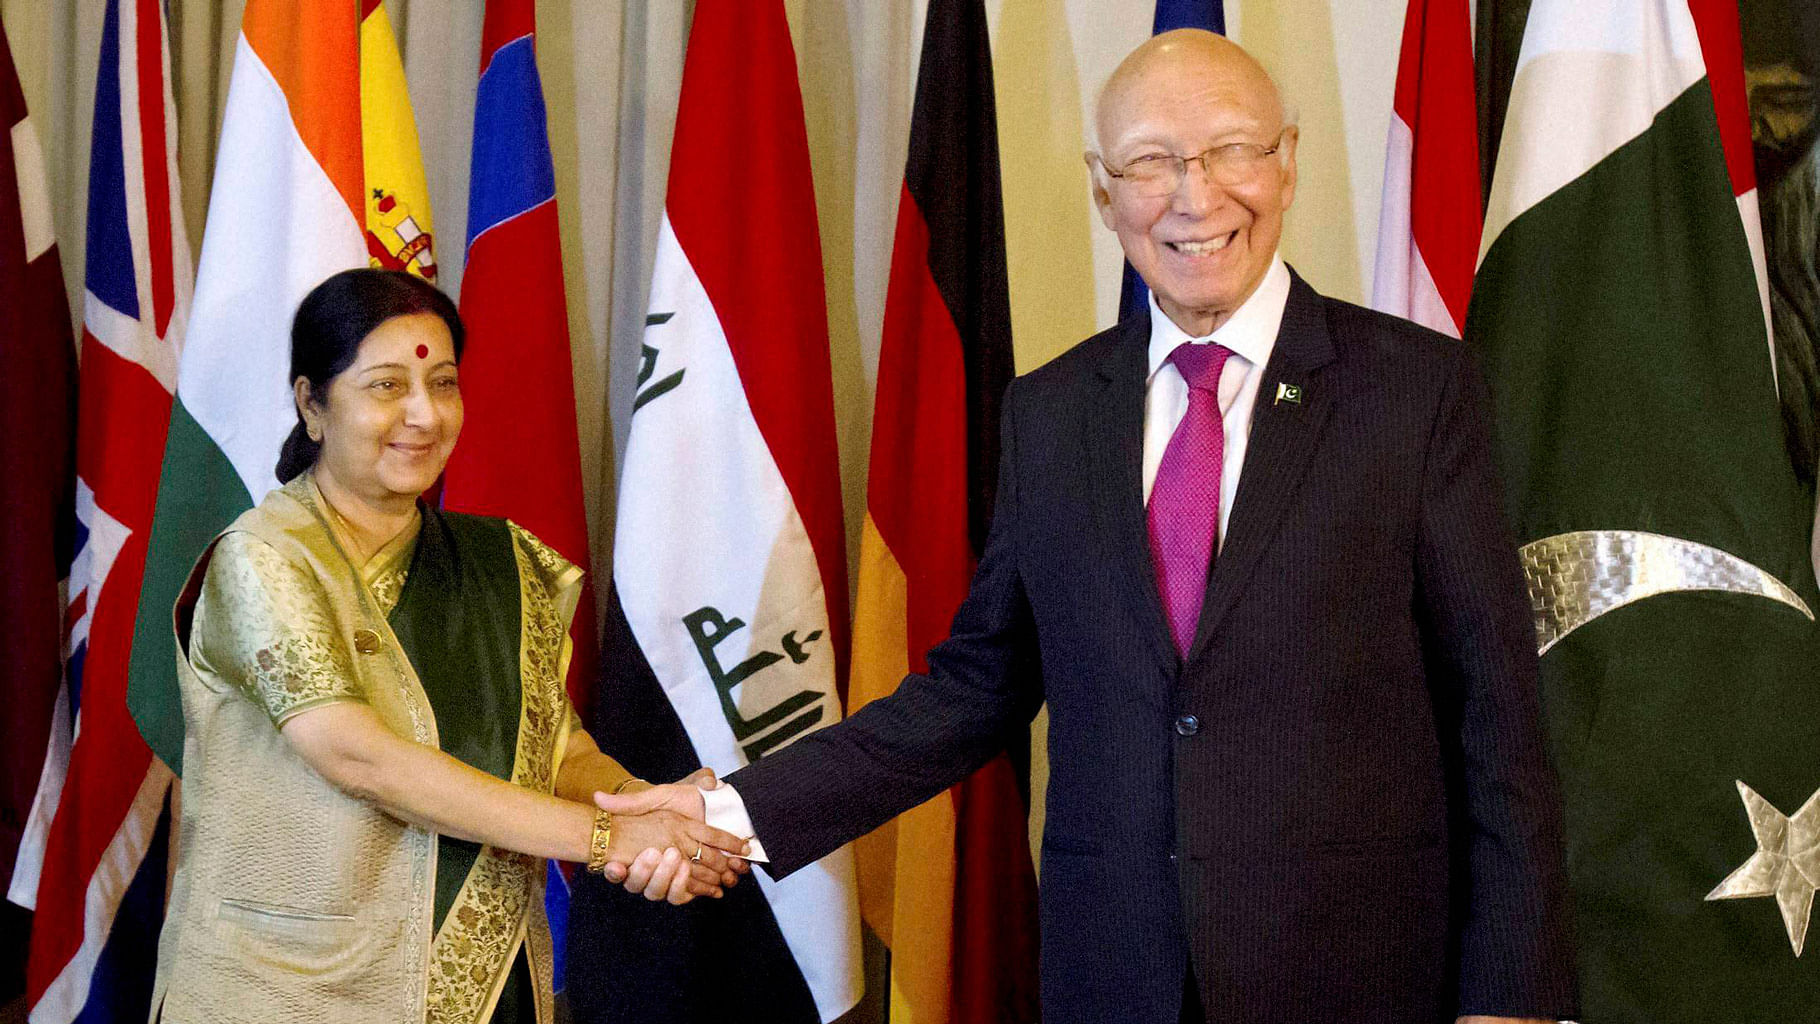 

External Affairs Minister Sushma Swaraj shakes hands with Pakistan’s Foreign Affairs Adviser Sartaj Aziz before a meeting in Islamabad on Wednesday. (Photo: PTI)